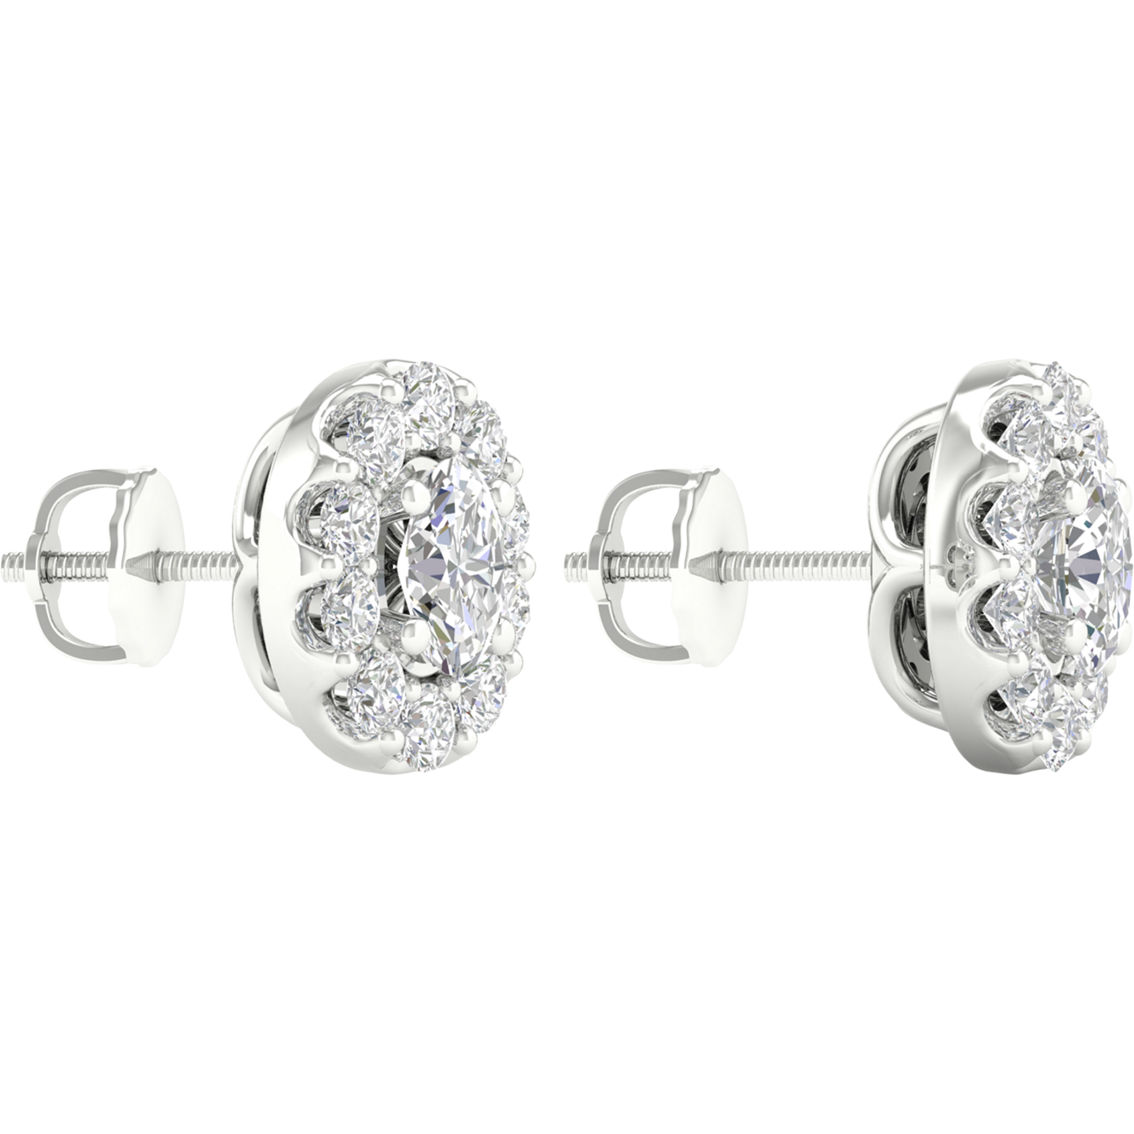 Pure Brilliance 14K White Gold 2 CTW Oval Diamond Stud Earrings - Image 2 of 2